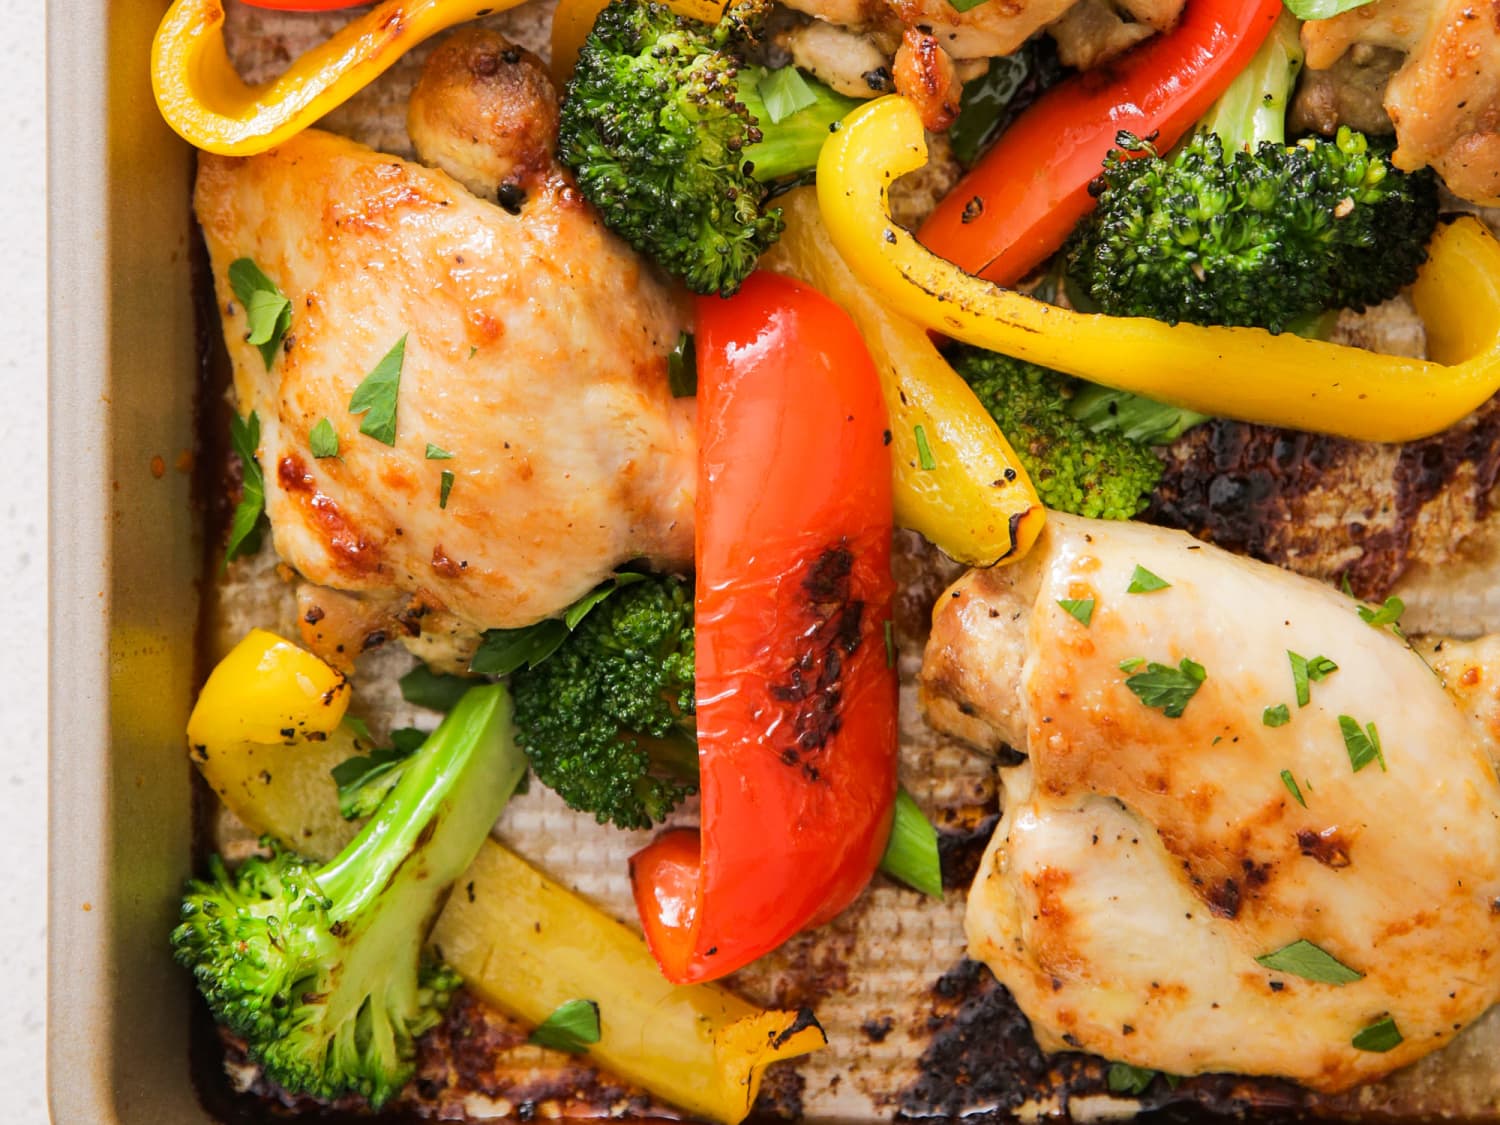 10+ Delicious Sheet Pan Chicken Dinners - Family Food on the Table